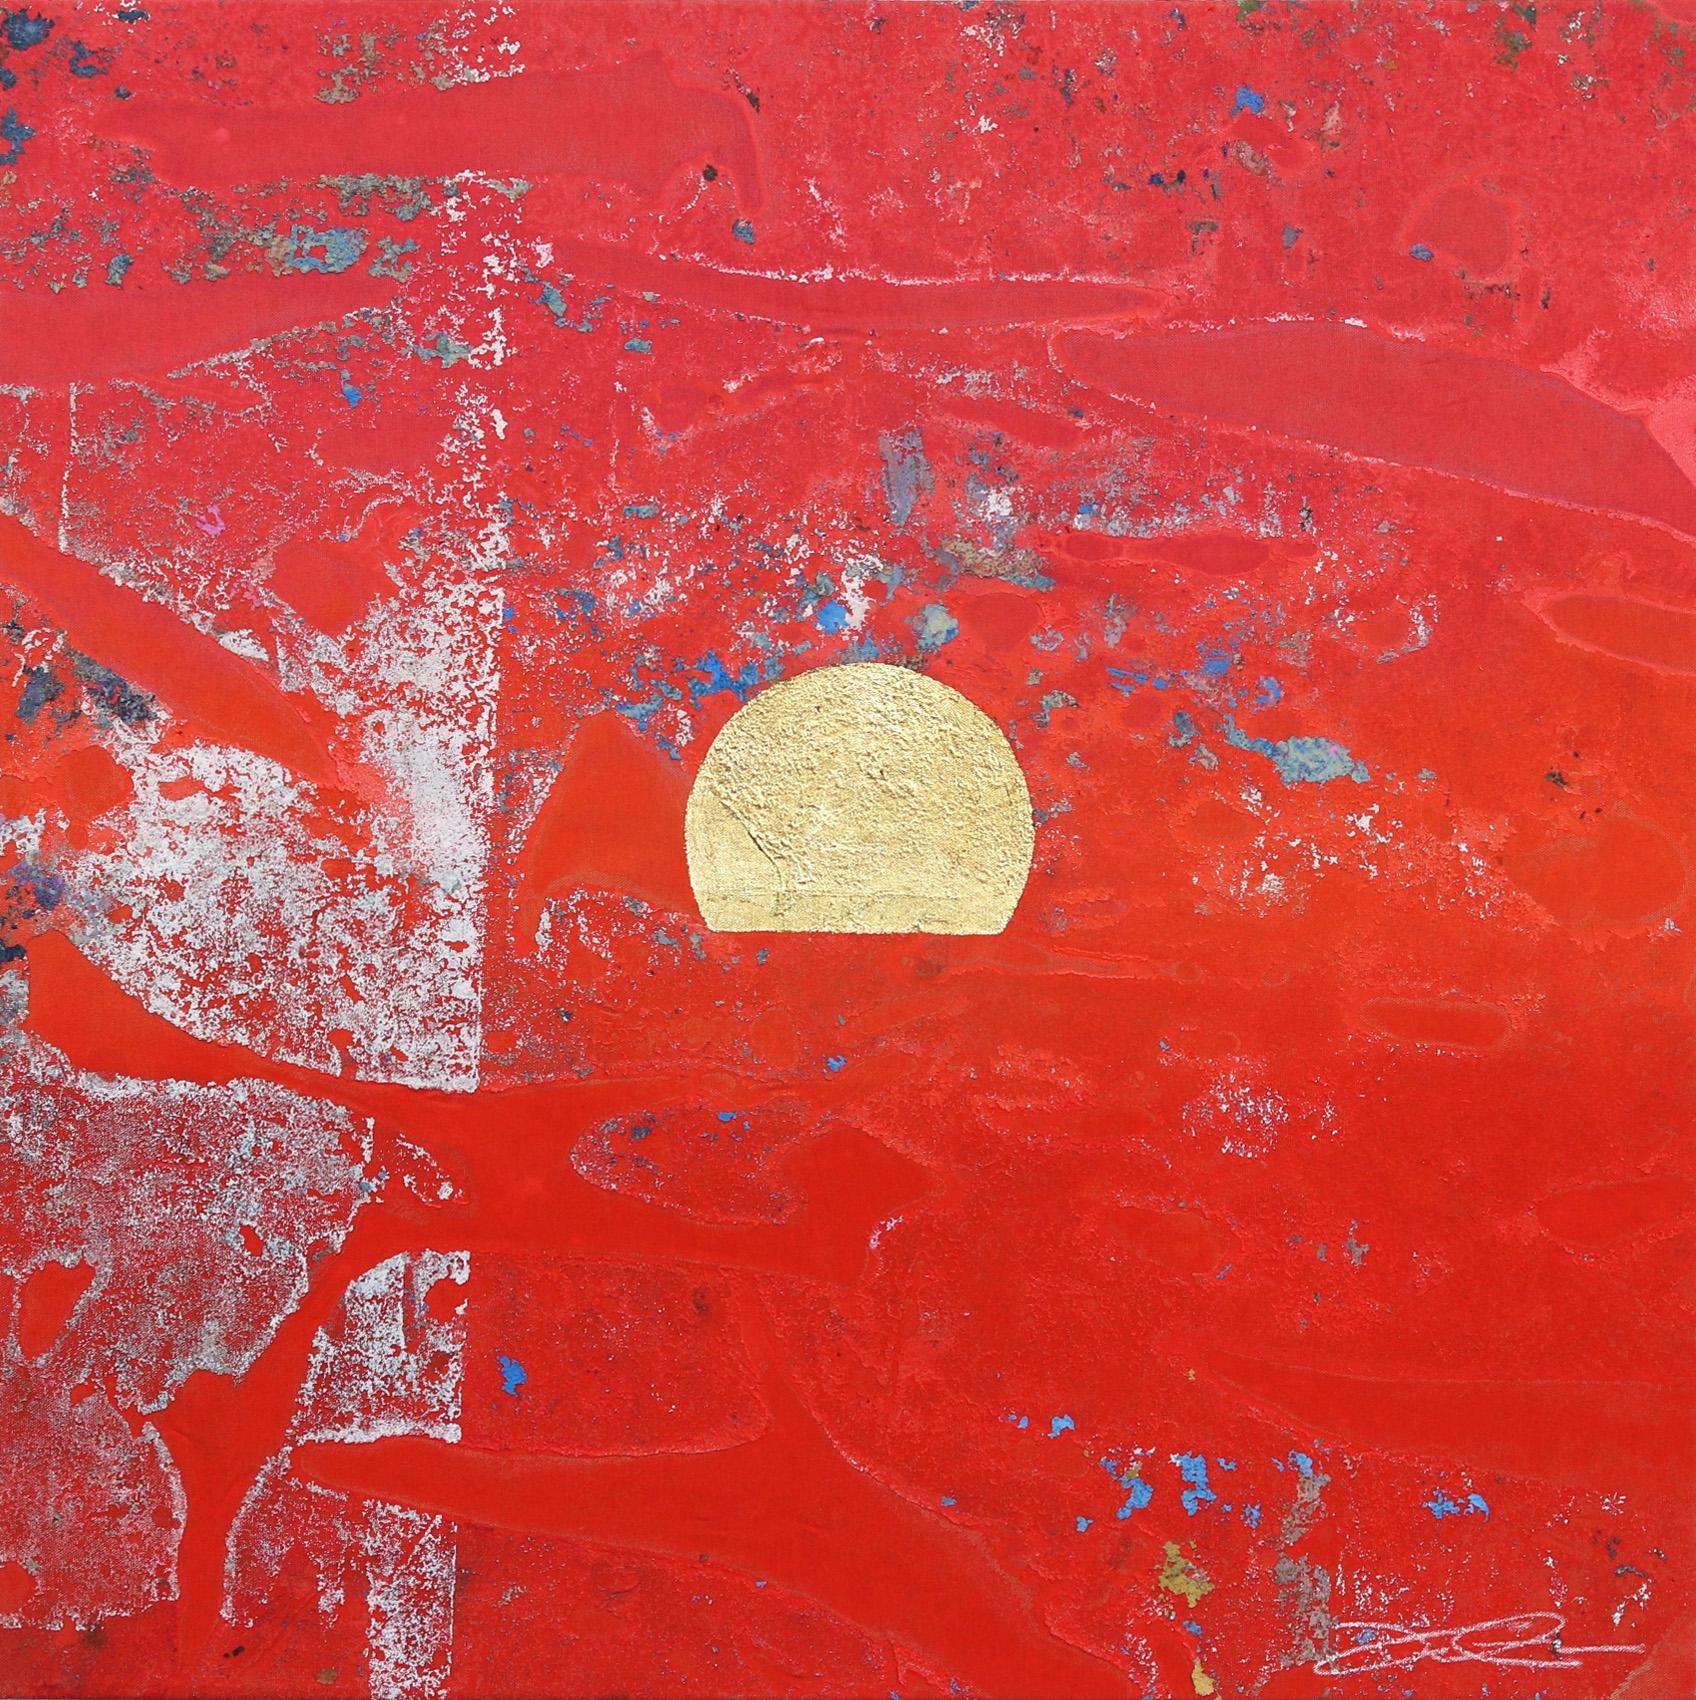 Concrete Sunset 1 - Bold Meditative Gold Leaf Red Painting on Linen Canvas